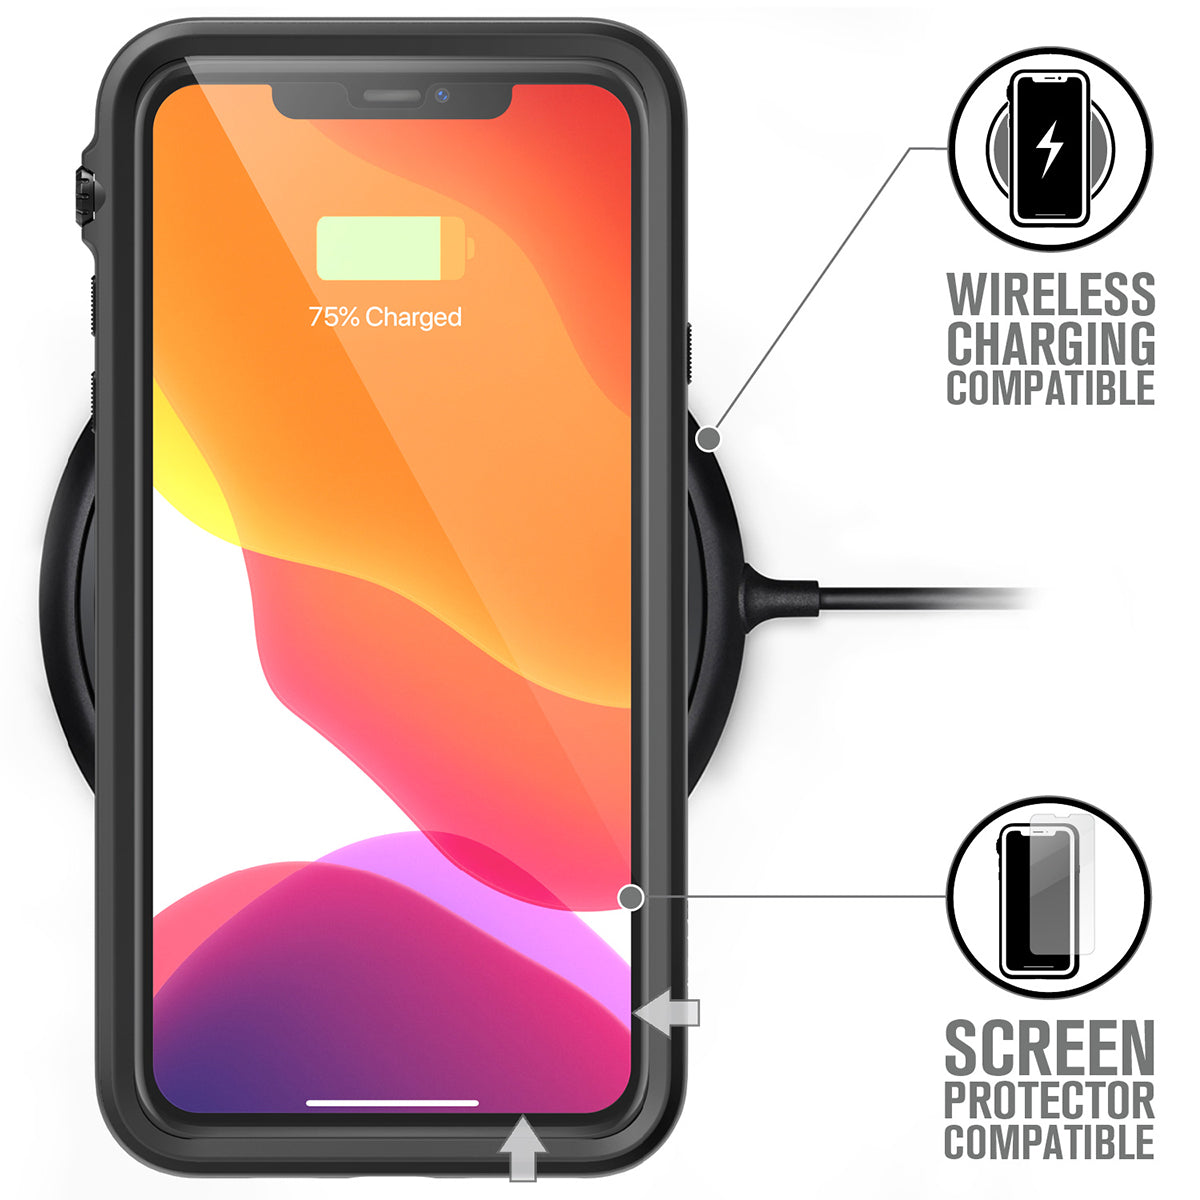 catalyst iPhone 11 series impact protection case for iphone 11 pro max stealth black placed on the wireless charger 75% charged text reads wireless charging compatible screen protector compatible